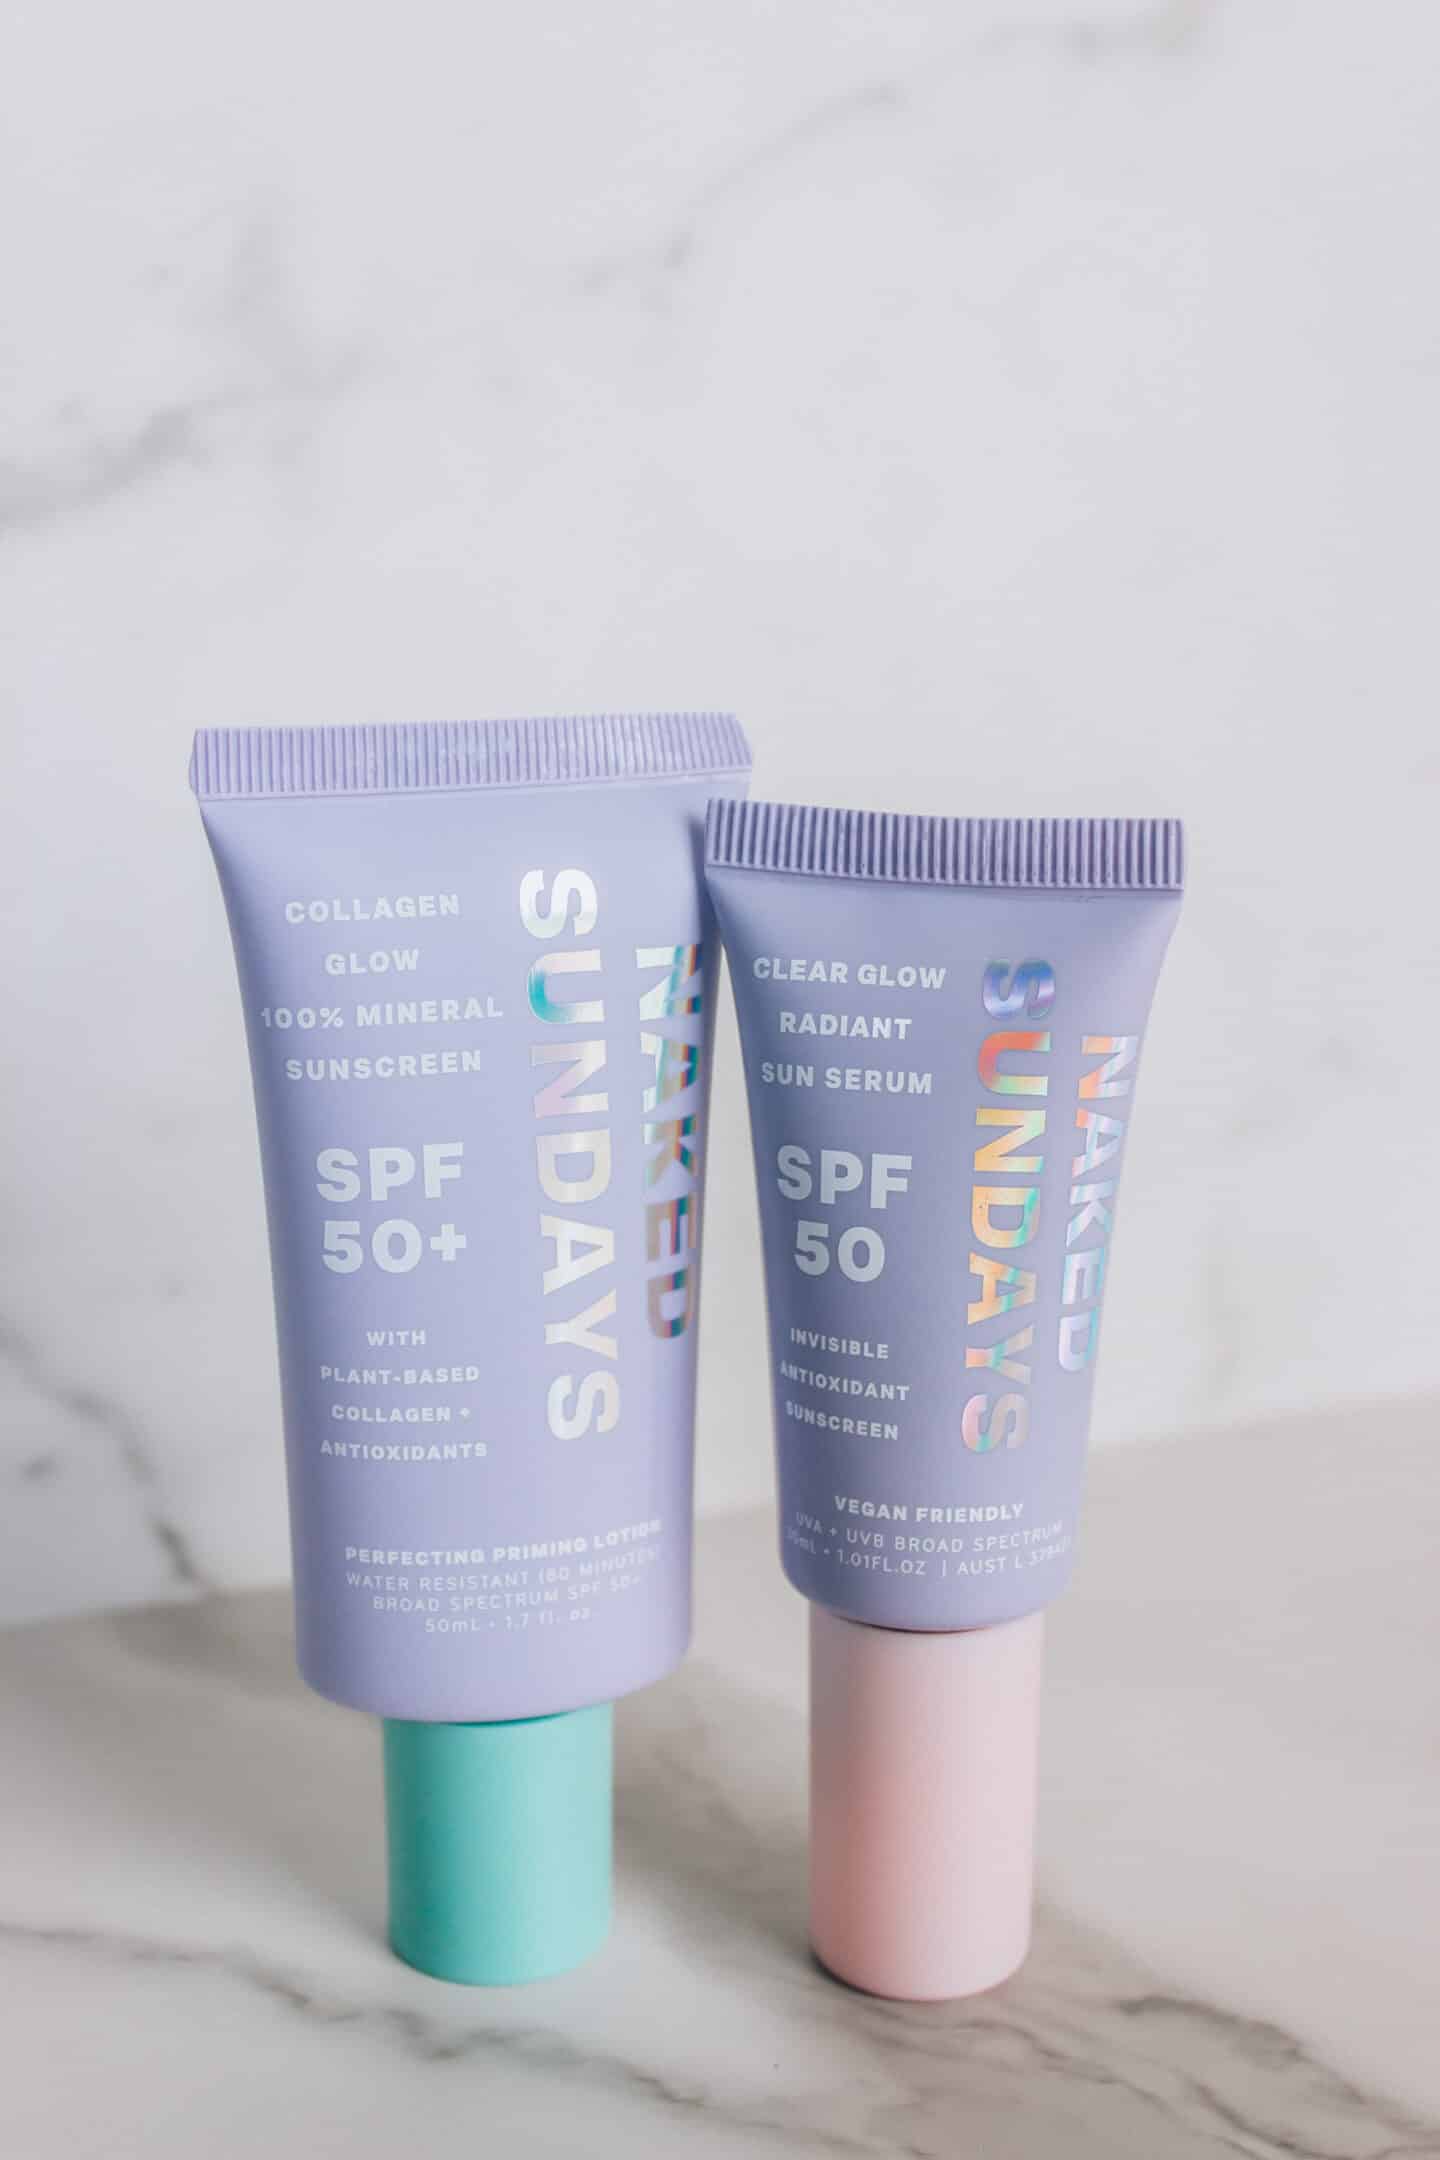 Naked Sundays sunscreen by beauty blogger What The Fab